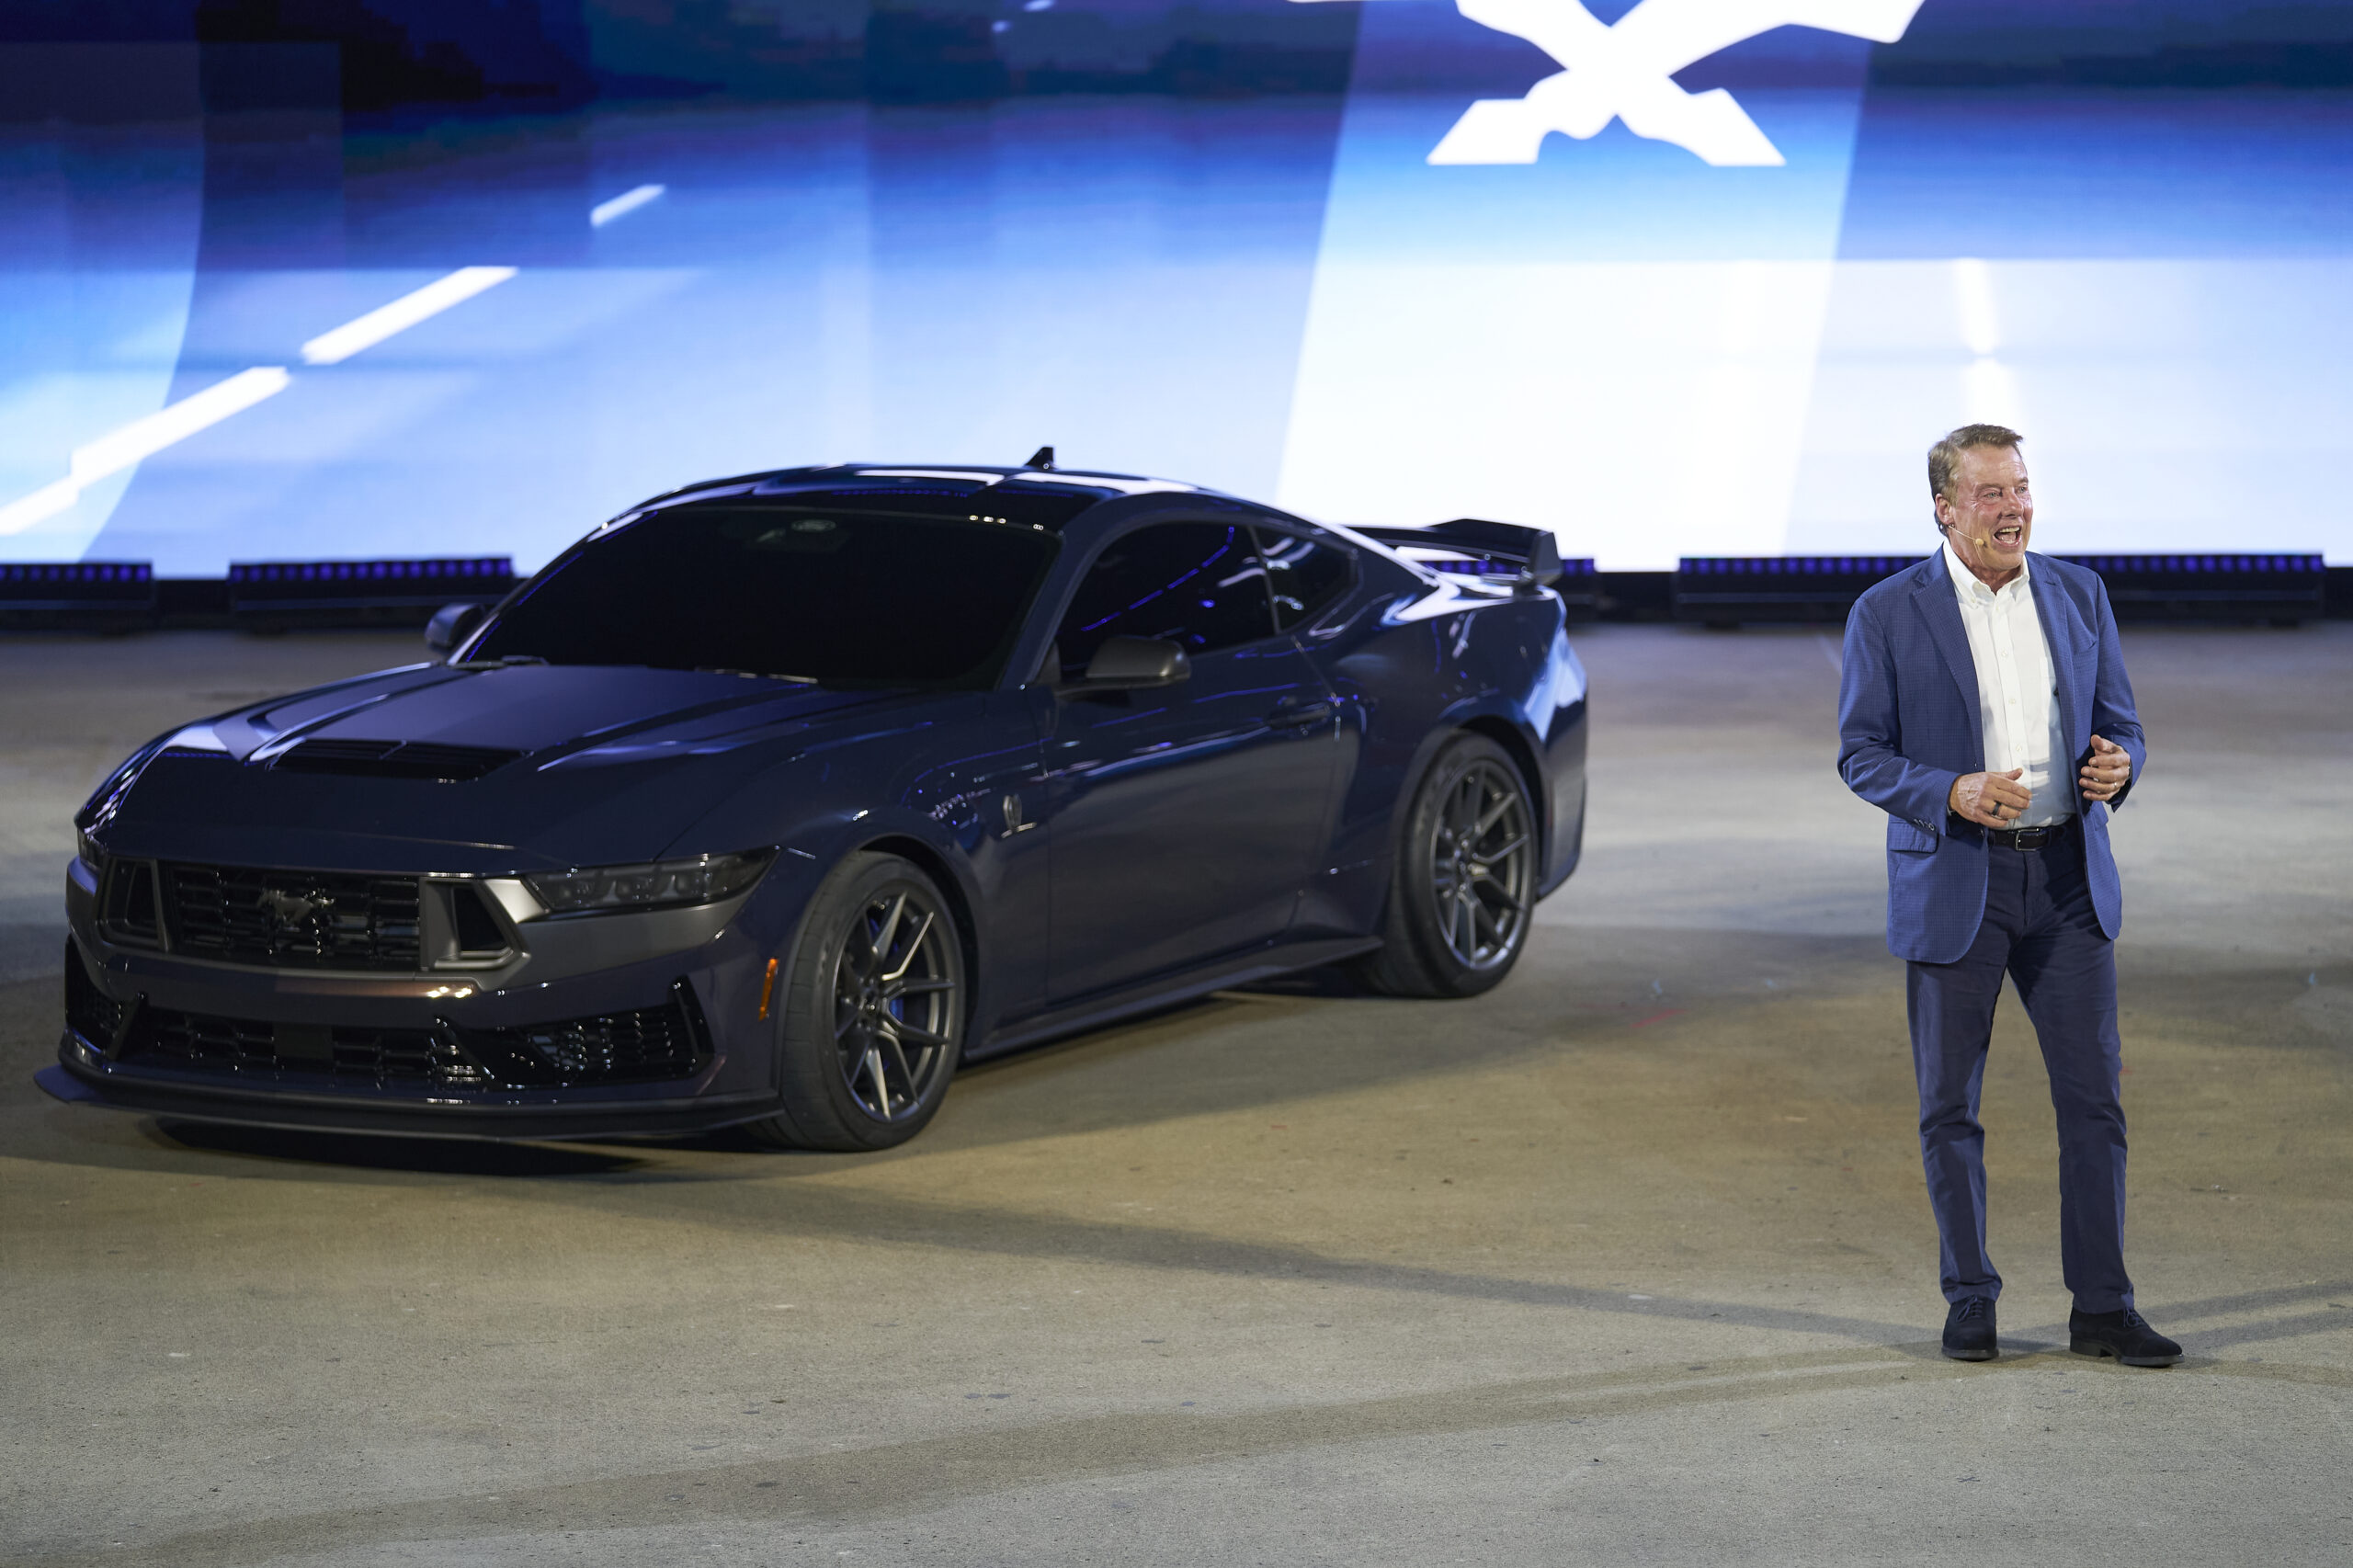 Ford unveils new gasoline-powered Mustang